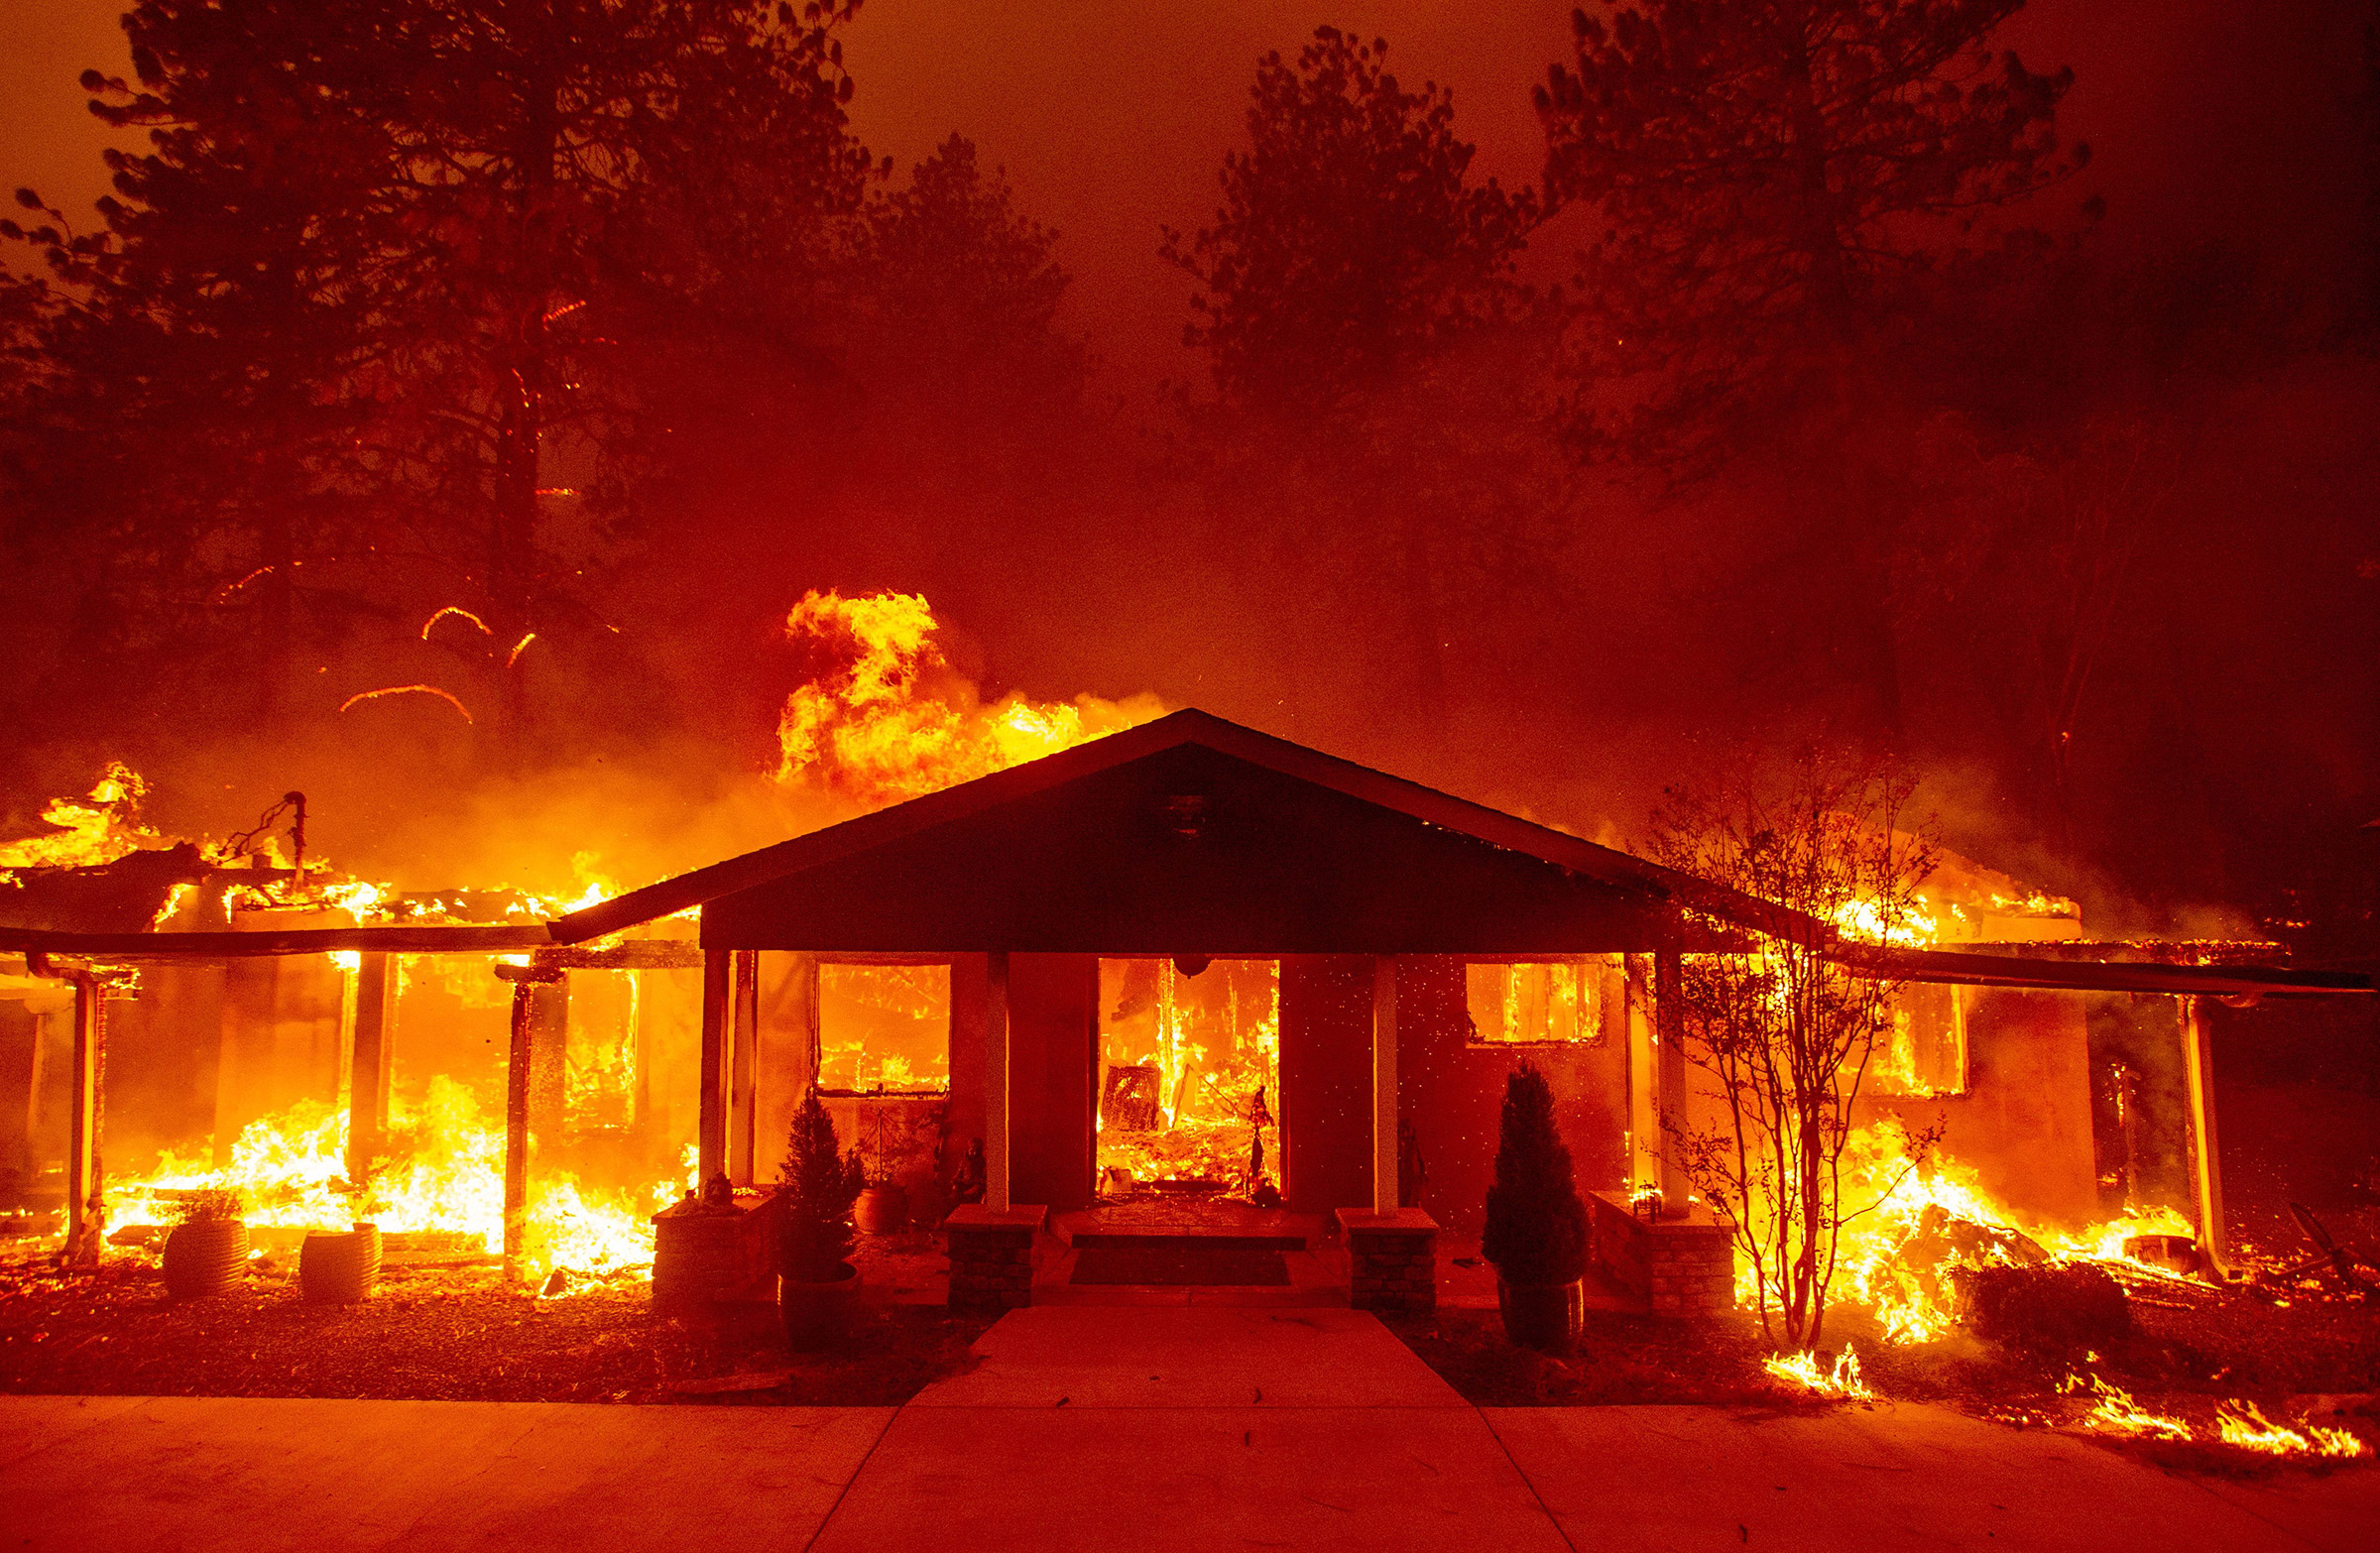 A home burns during the Camp fire in Paradise, California on Nov. 8, 2018. (Josh Edelson—AFP/Getty Images)